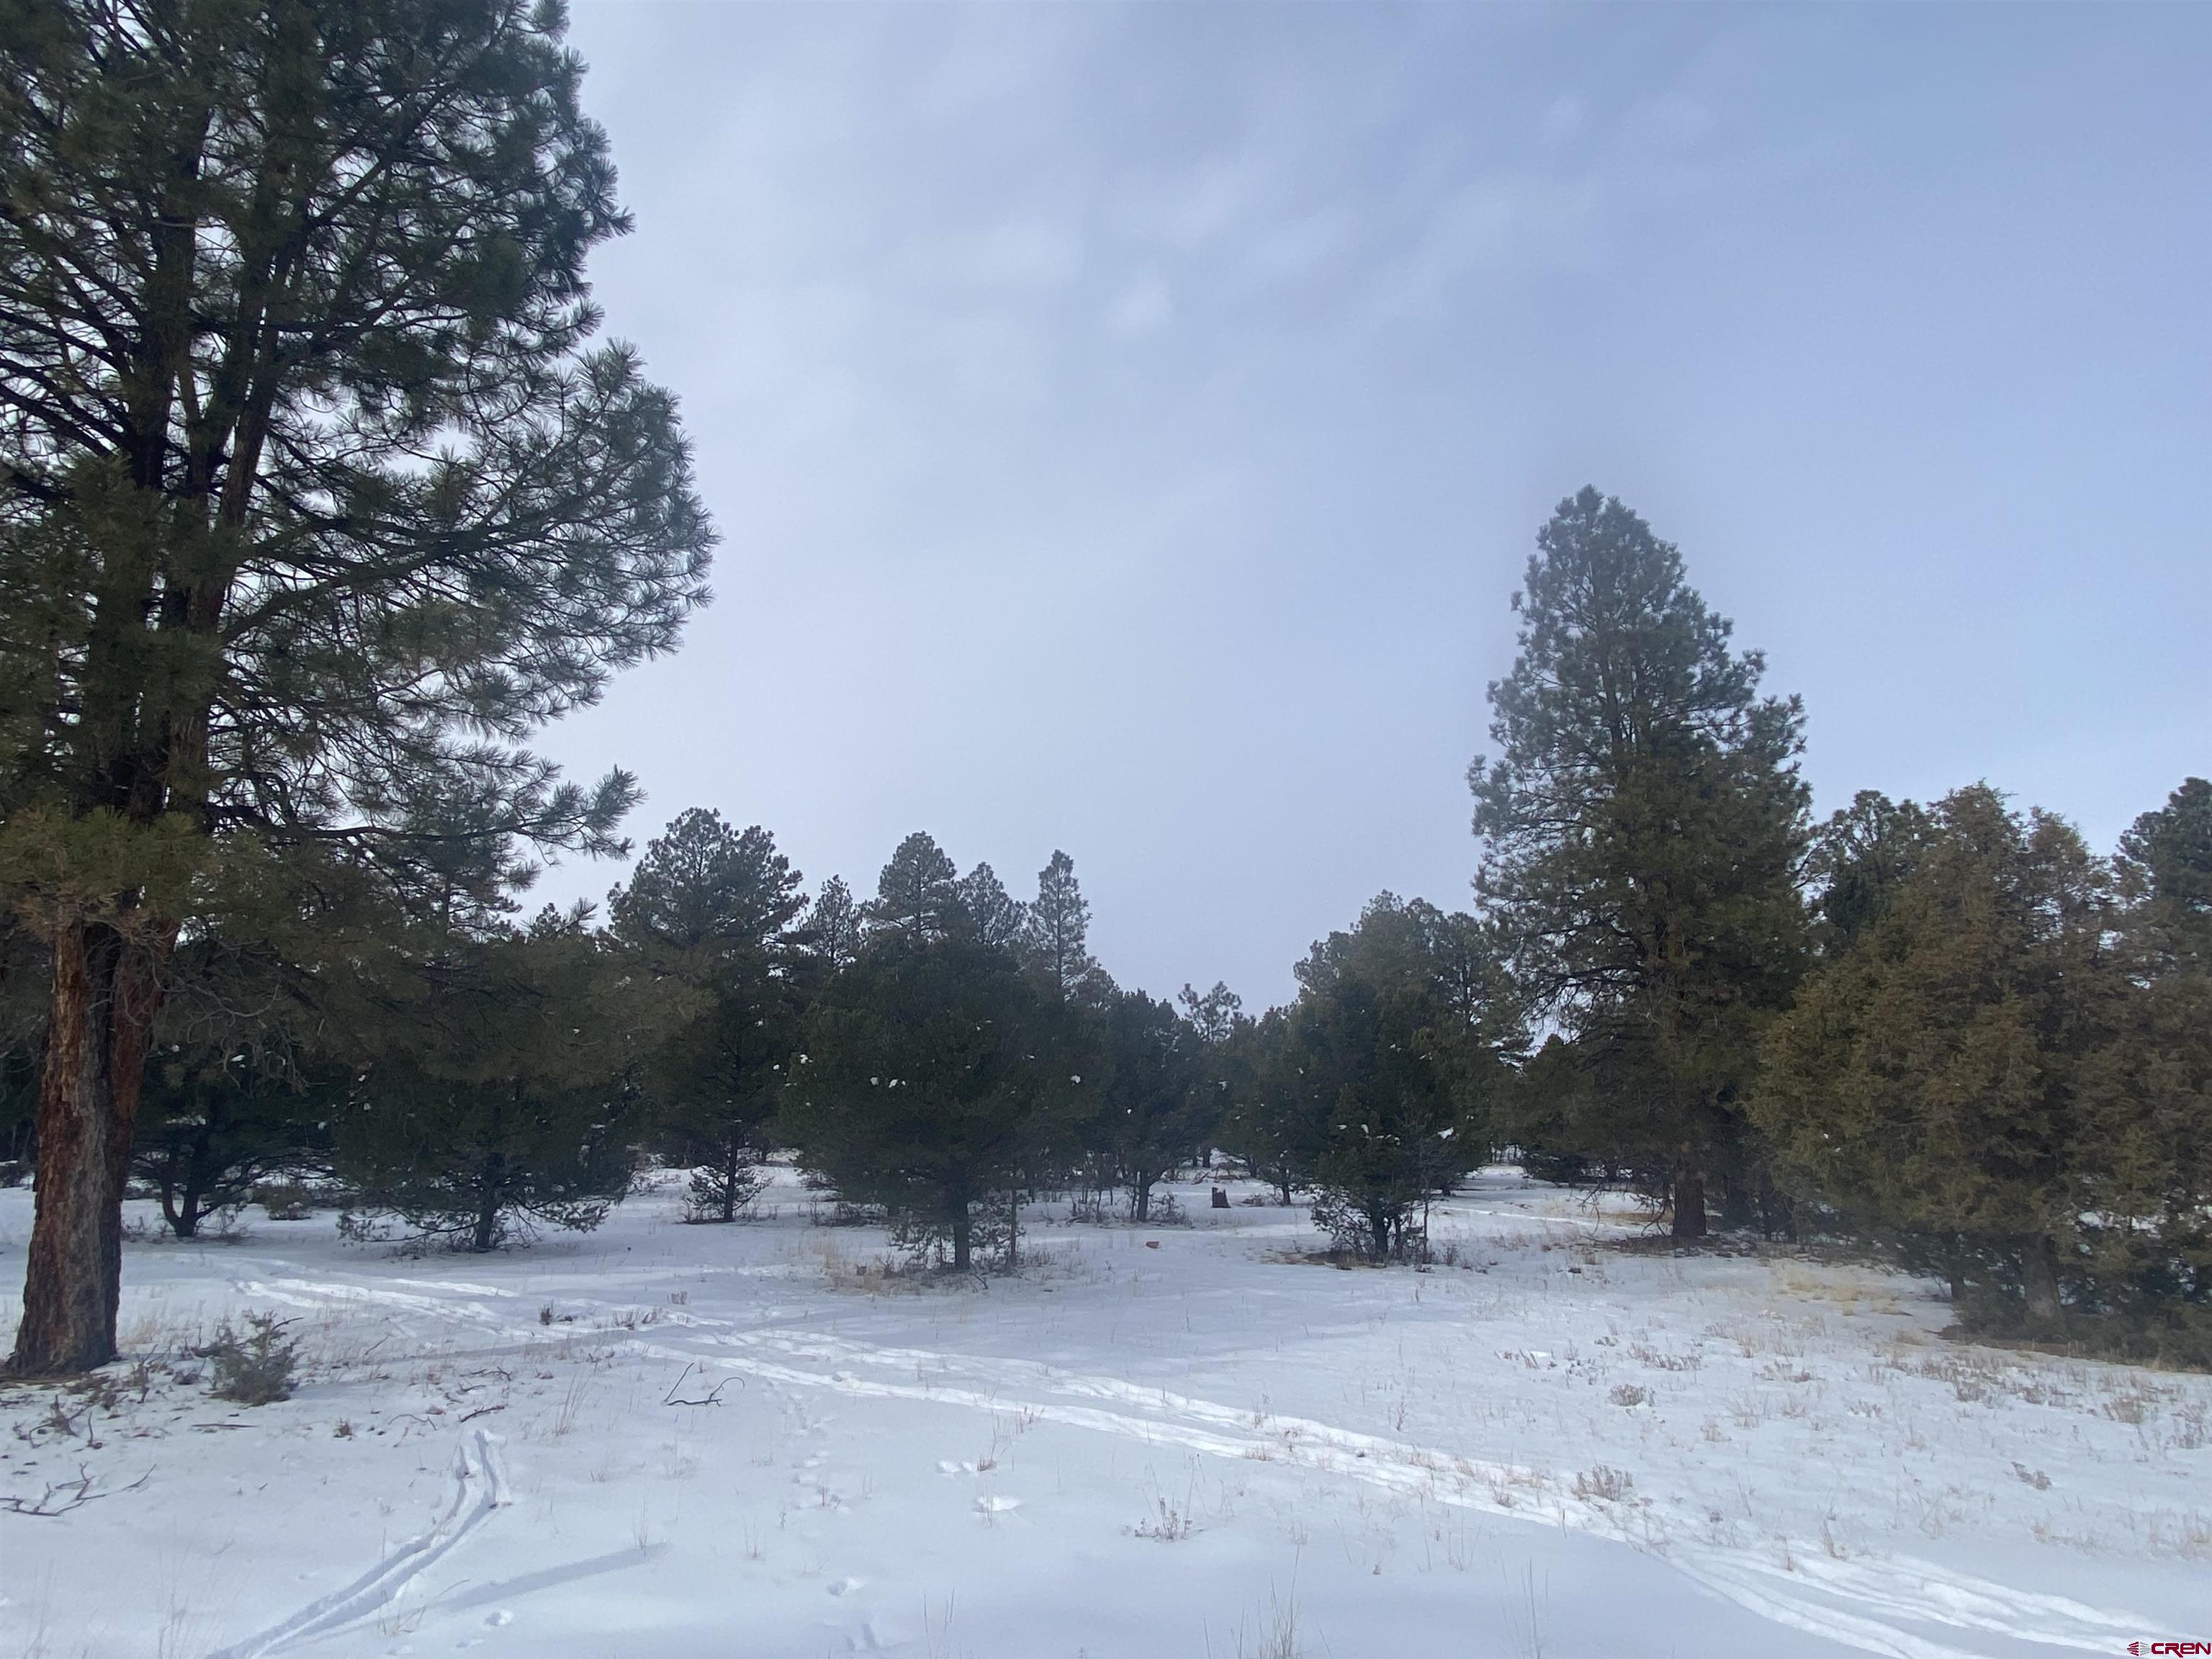 Great 1 acre lot in Divide Ranch and Club. Lot is on the exterior portion of the subdivision so you don't have to worry about flying golf balls hitting your windows from the fairway but still enjoy the amenities of this great community. And this location is close to the club house too.  Pretty Ponderosa Pine trees abound offering shade and relief from the hot summer sun and you will love the deer that wander through.  Dallas Creek water tap is paid and installed with all utilities at the lot line with paved roads throughout the subdivision.  Private and peaceful yet just 10 minutes to the Town of Ridgway, 30 minutes to Montrose with the recently (and continuing to be) improved Regional Airport and 45 minutes to world class skiing in Telluride. Come realize your dream of owning property and building a home in Southwestern Colorado!